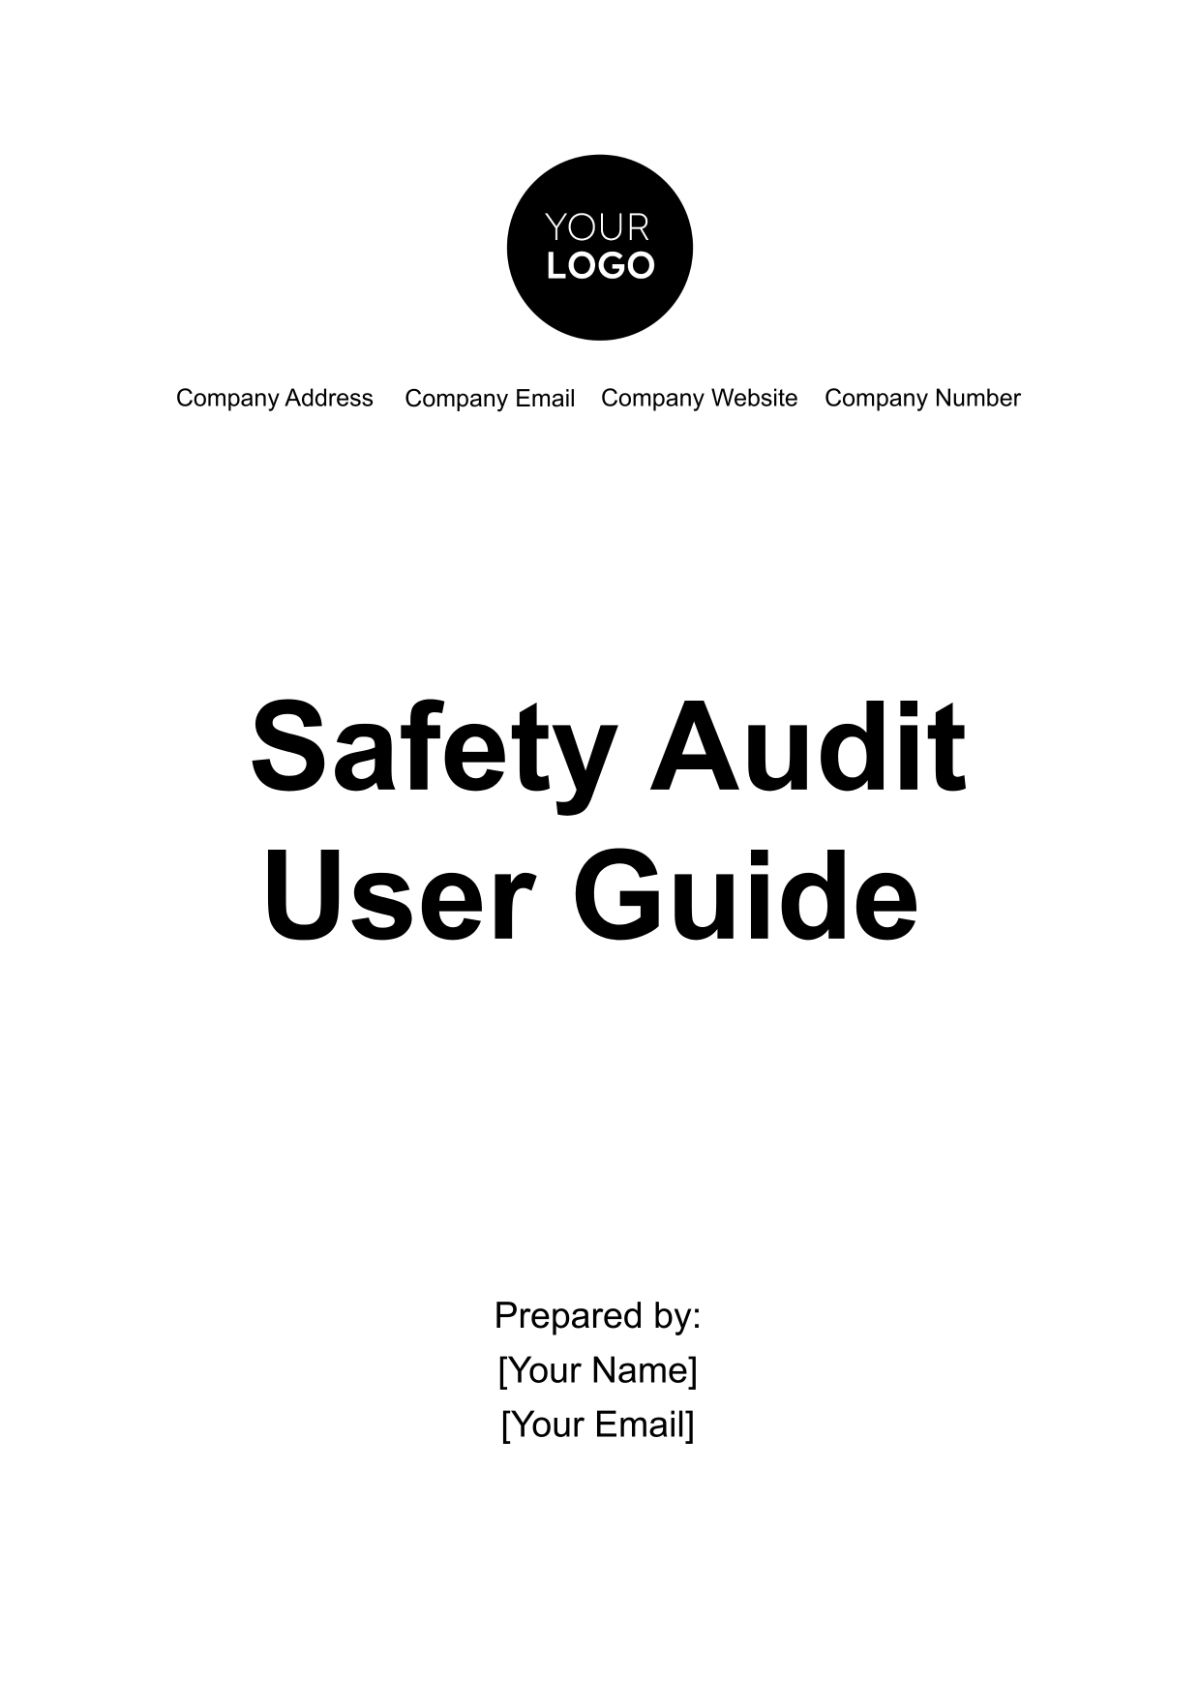 Safety Audit User Guide Template